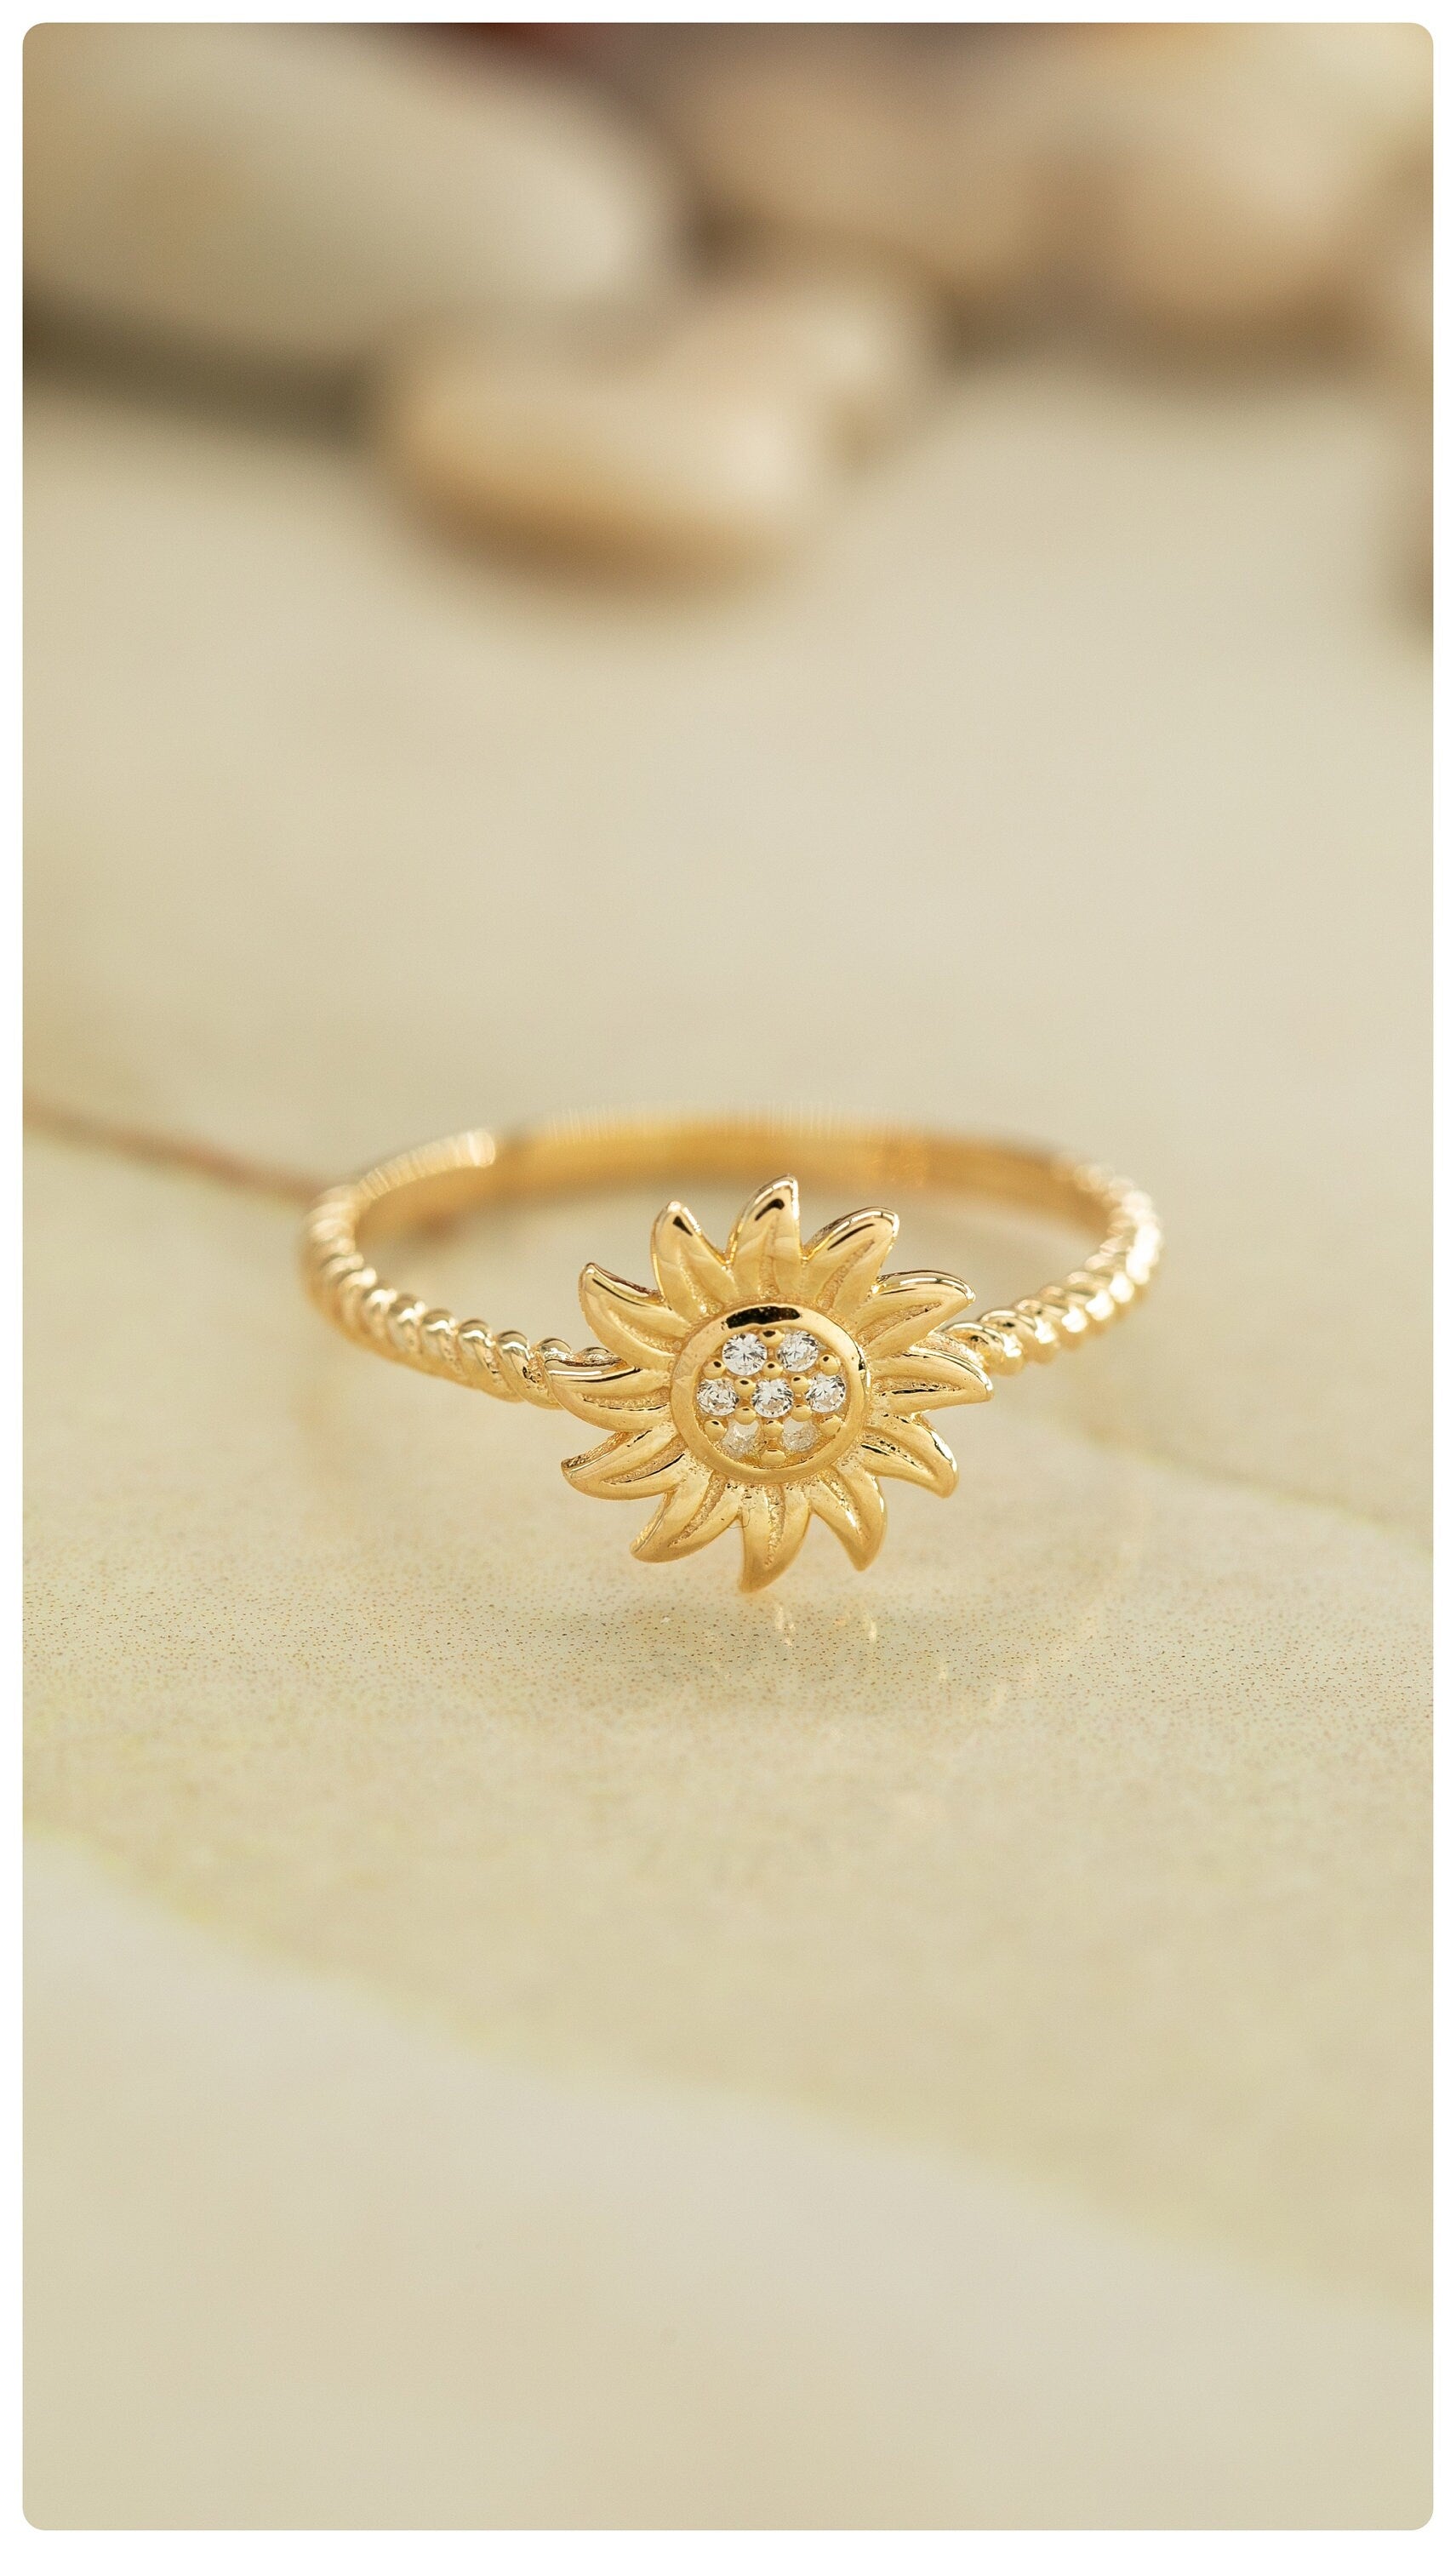 14K Elegant Sunflower Ring, 925 Sterling Silver Floral Motif Jewelry, Sunflower Gift, Wildflower Ring, Ring for Women, Friendship Jewelry